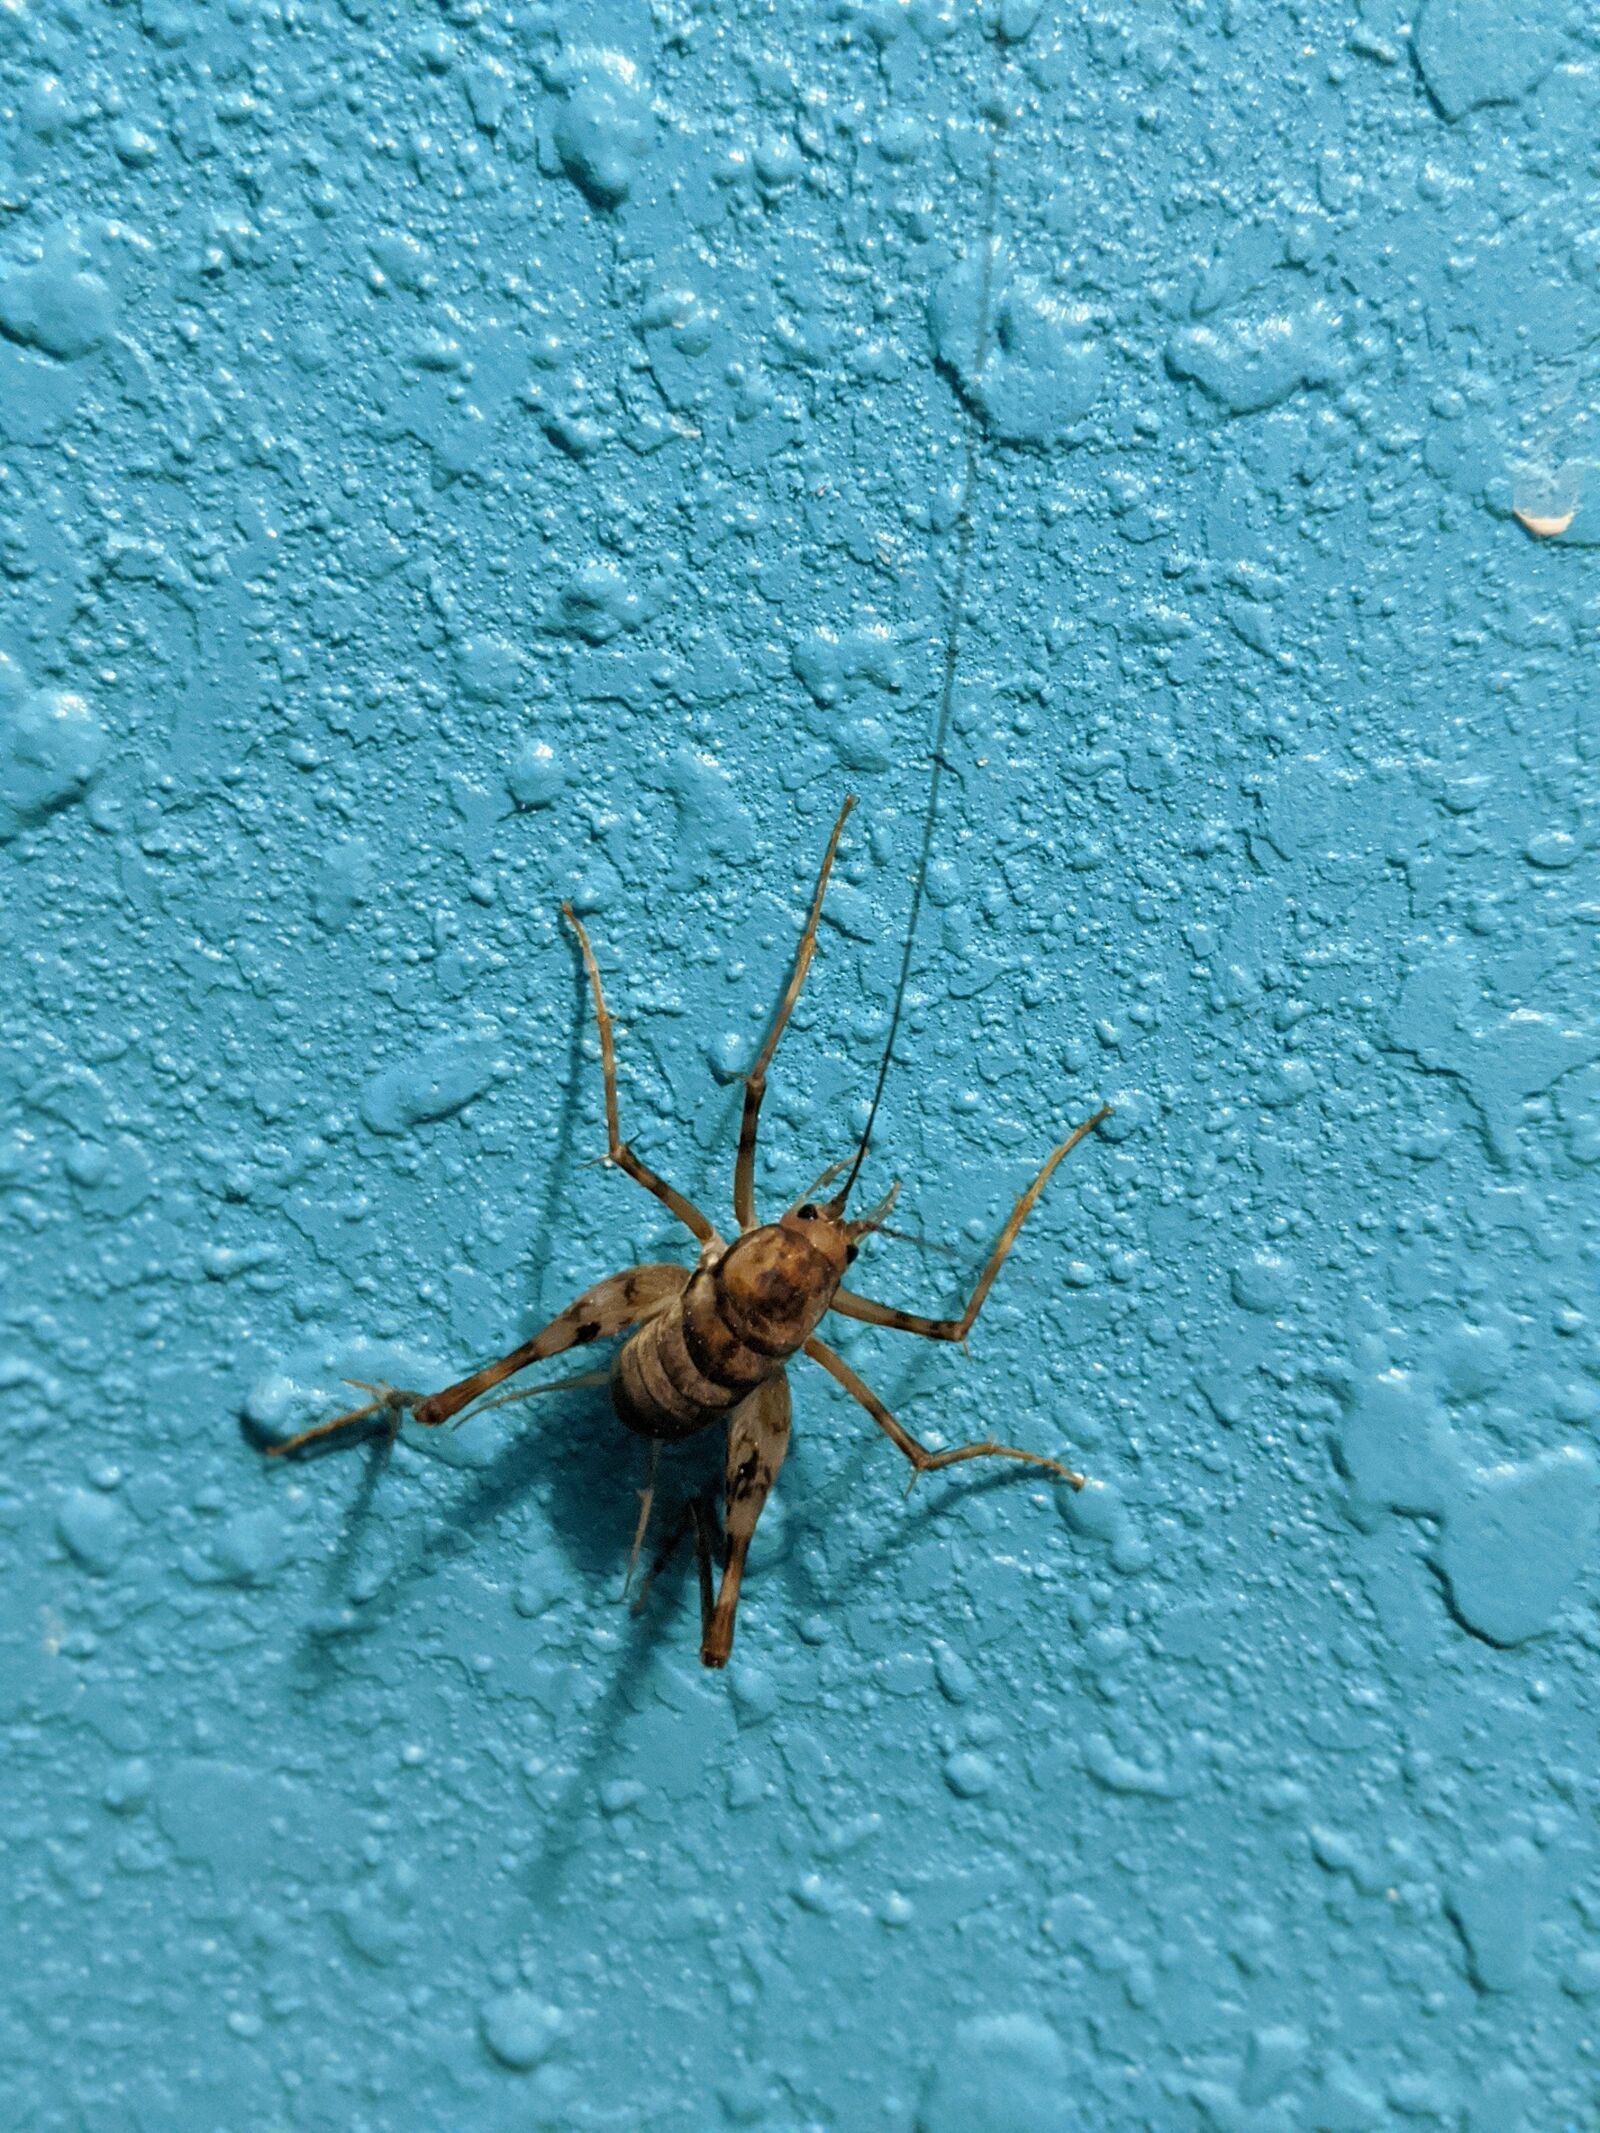 Google Pixel 2 sample photo. Cricket, insect, nature photography